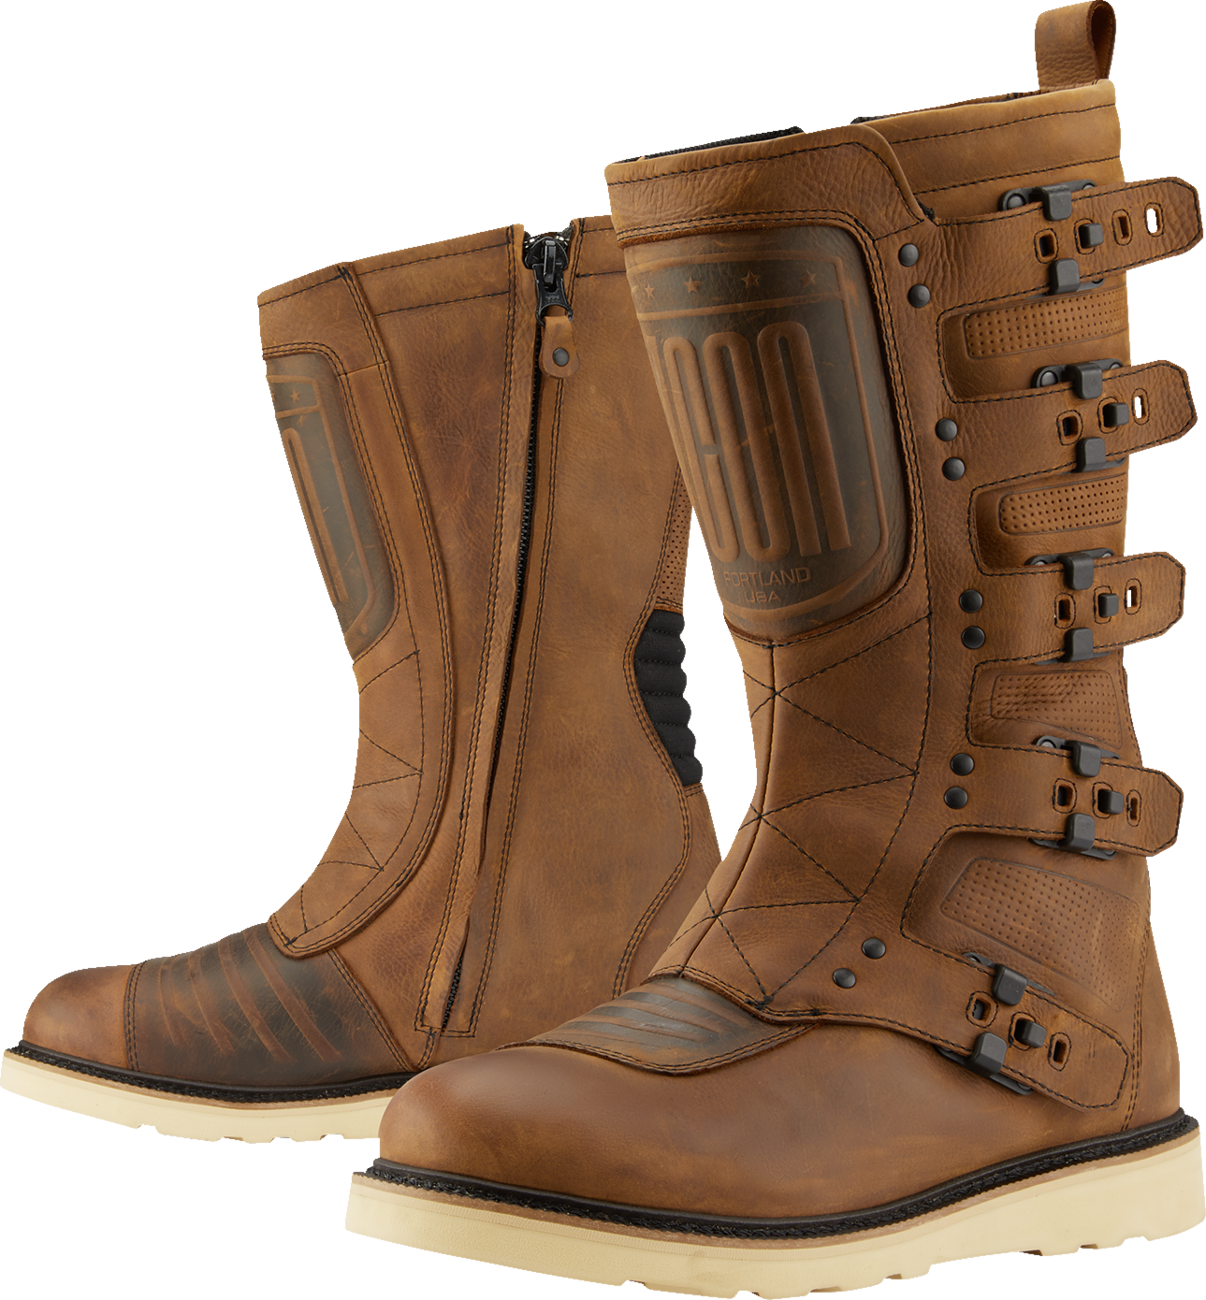 ICON Elsinore 2™ Boots - Brown - Size 11 3403-1144